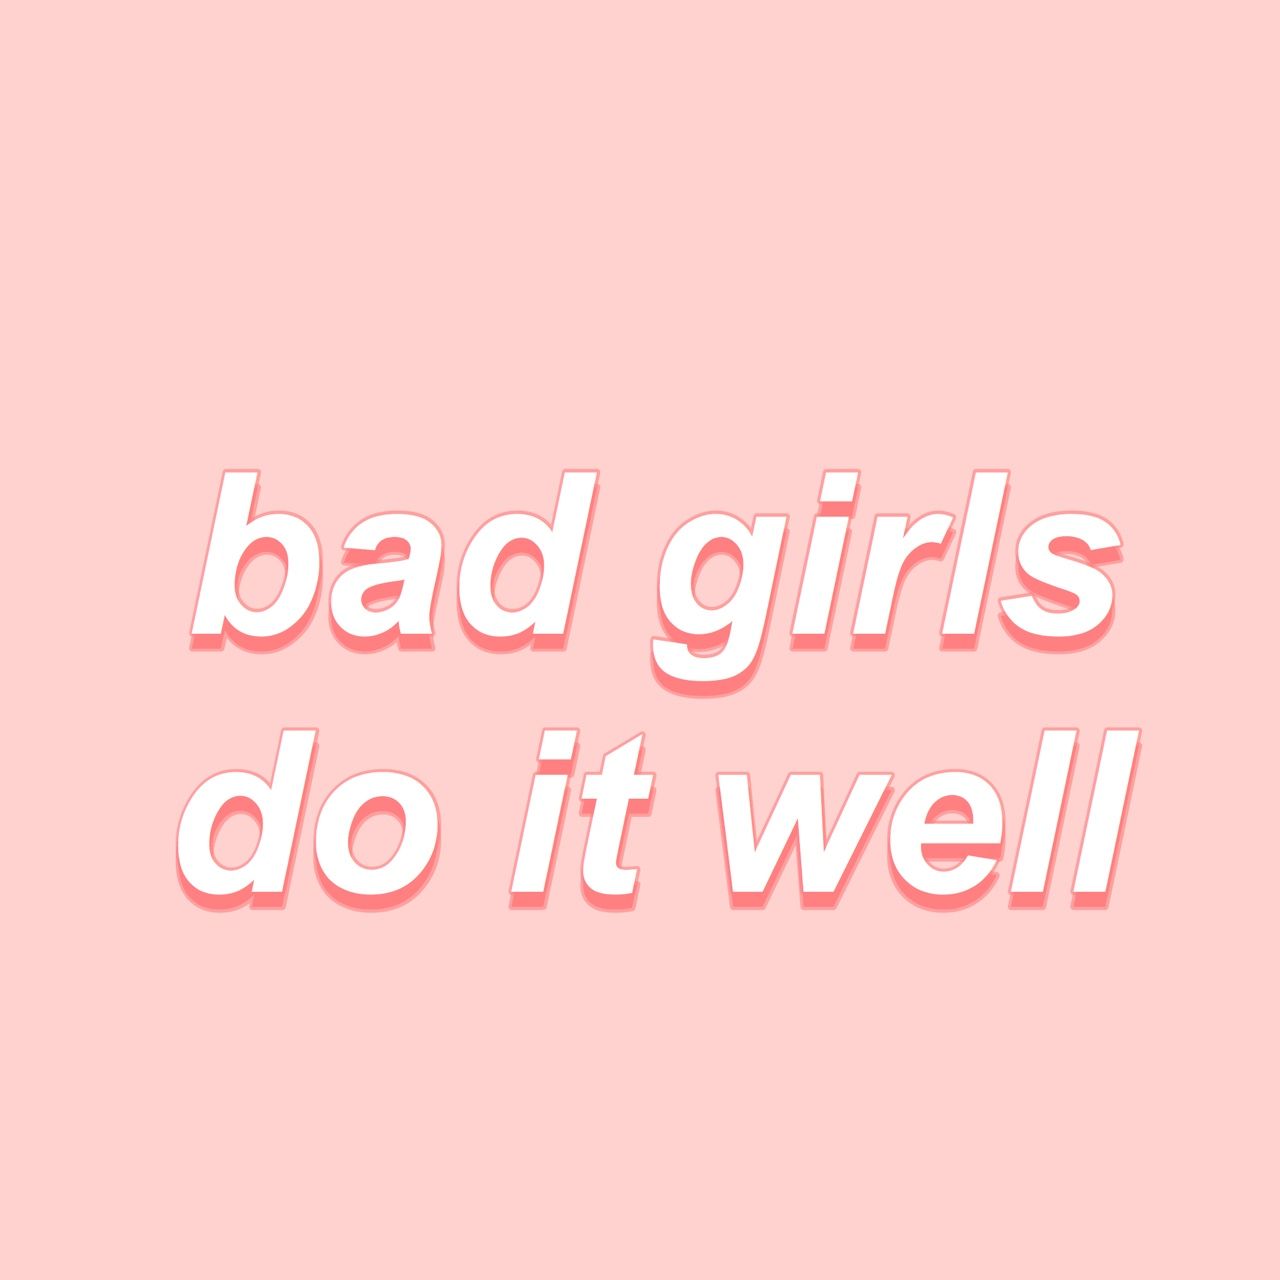 Bad Girl Quotes Wallpaper Free Bad Girl Quotes Background